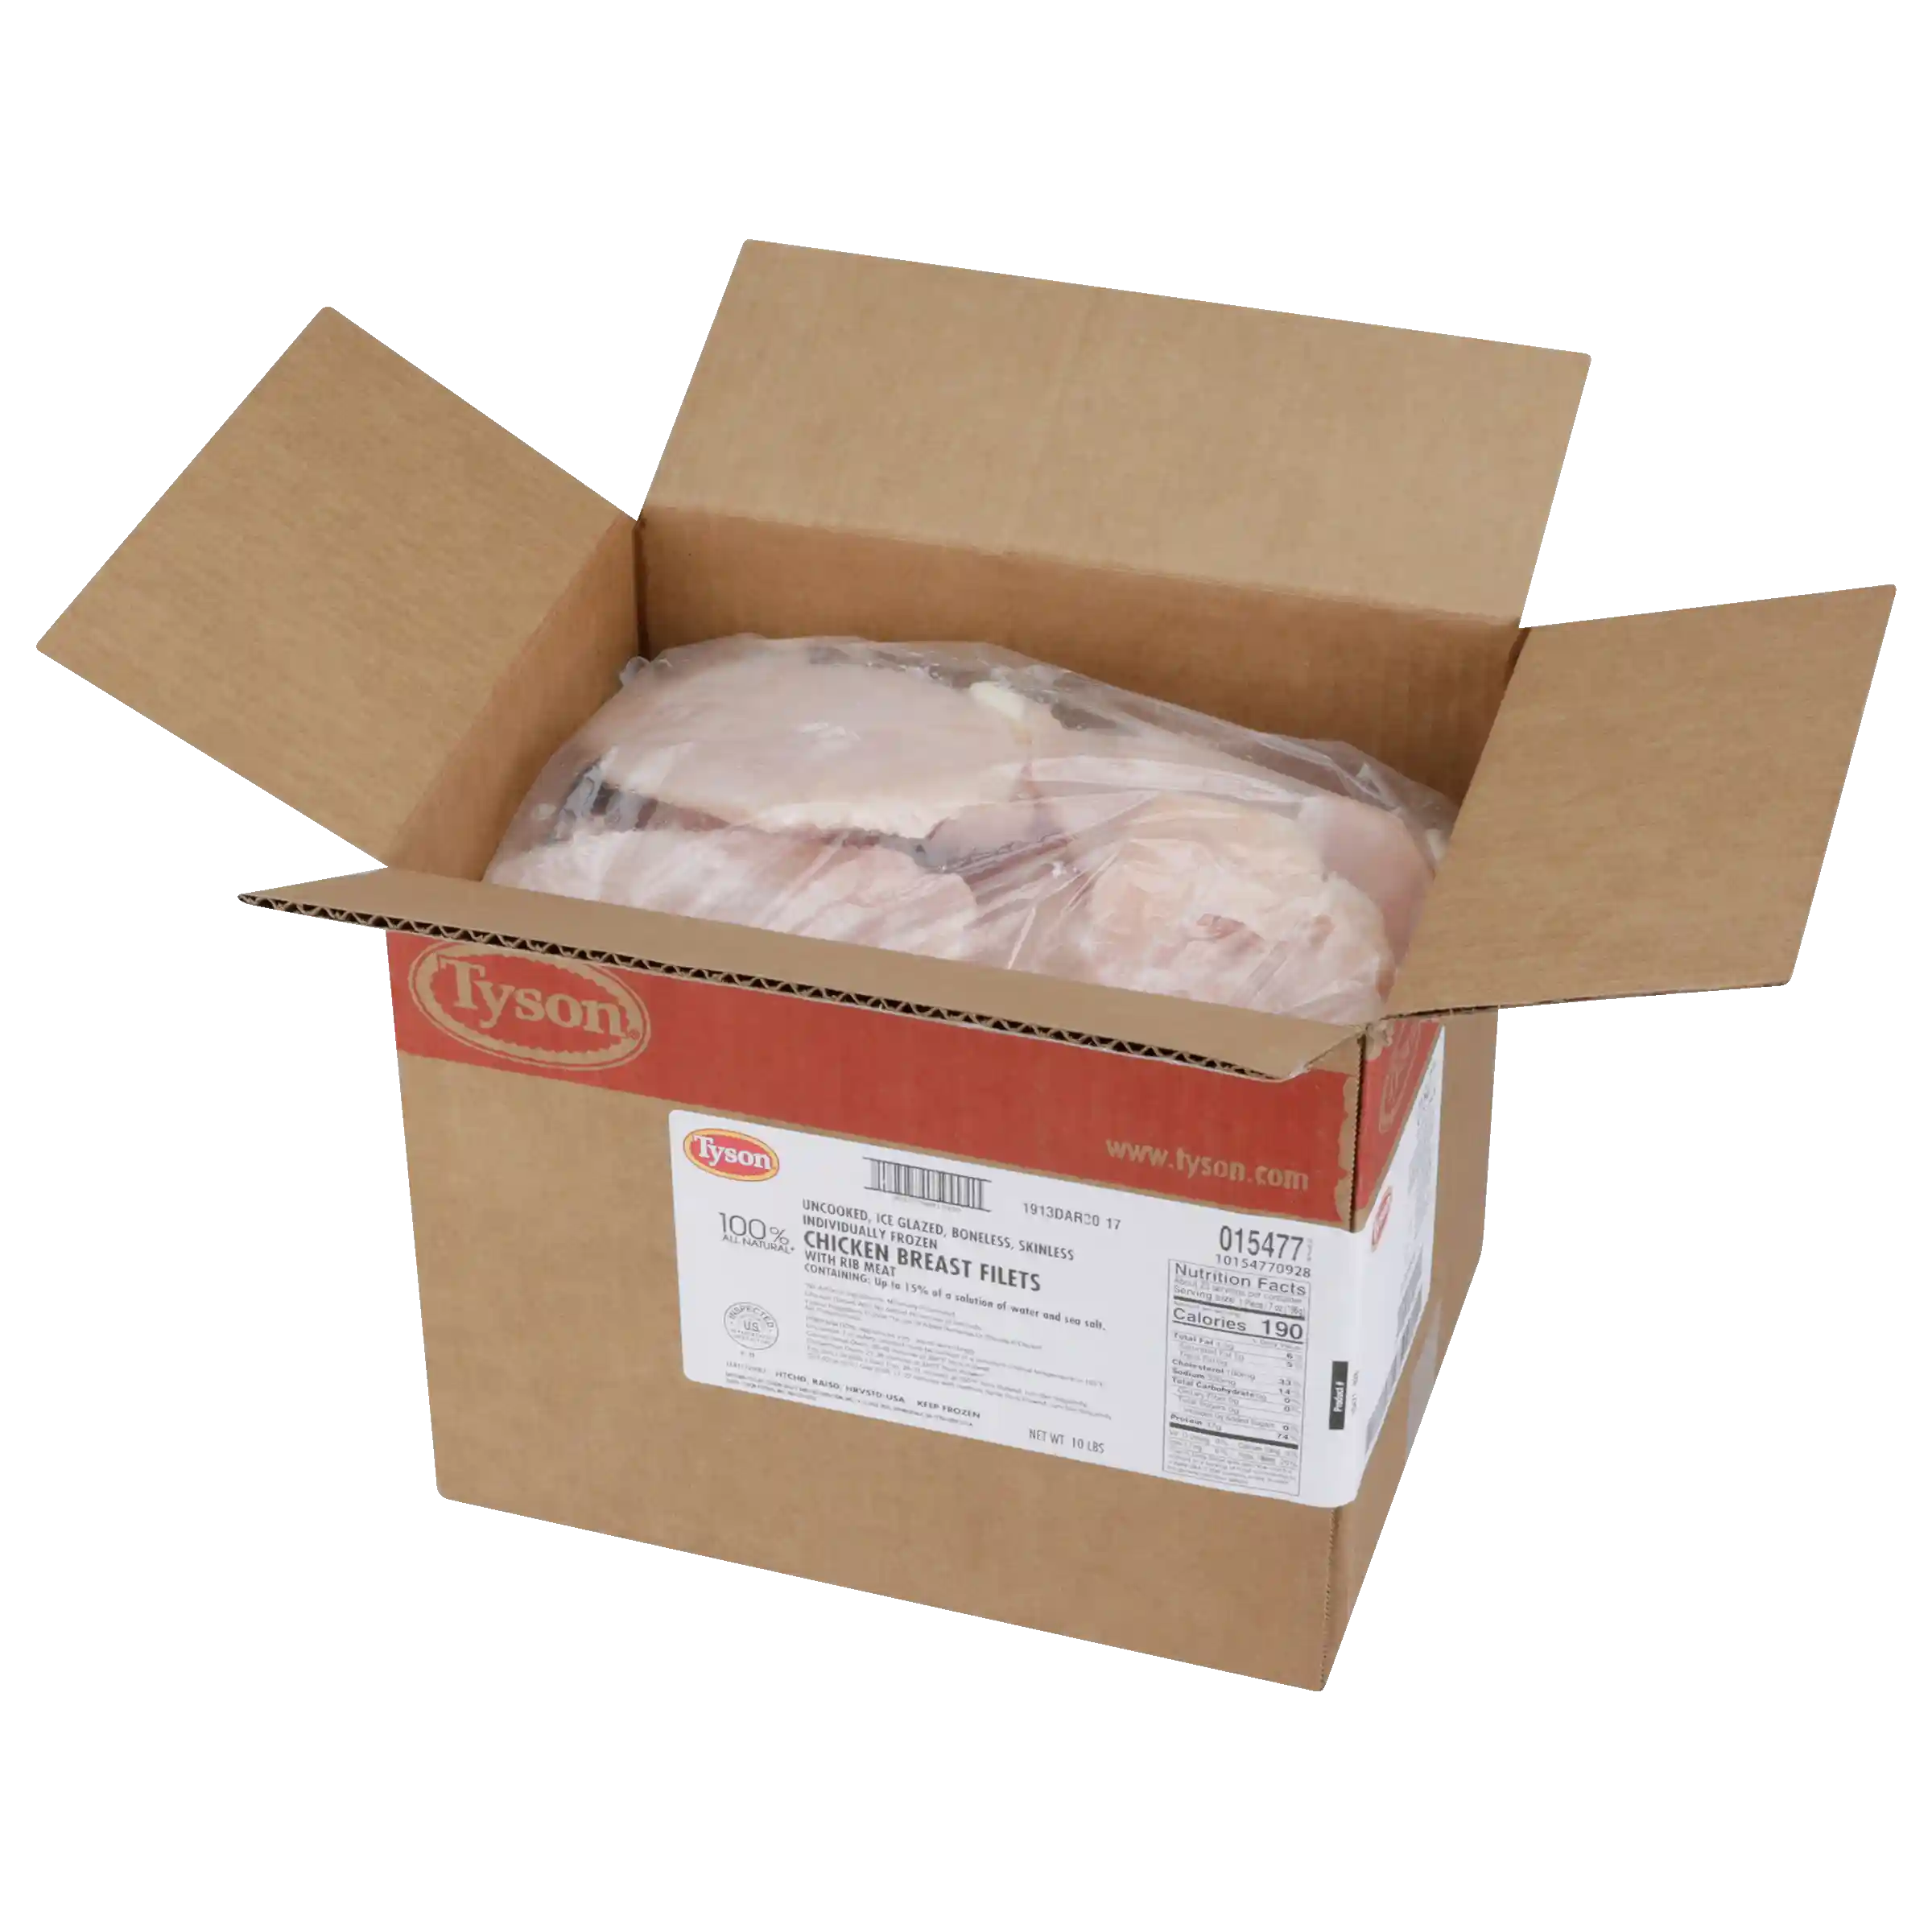 Tyson® All Natural* IF Unbreaded Boneless Skinless Chicken Breast Filets, 7 oz._image_41